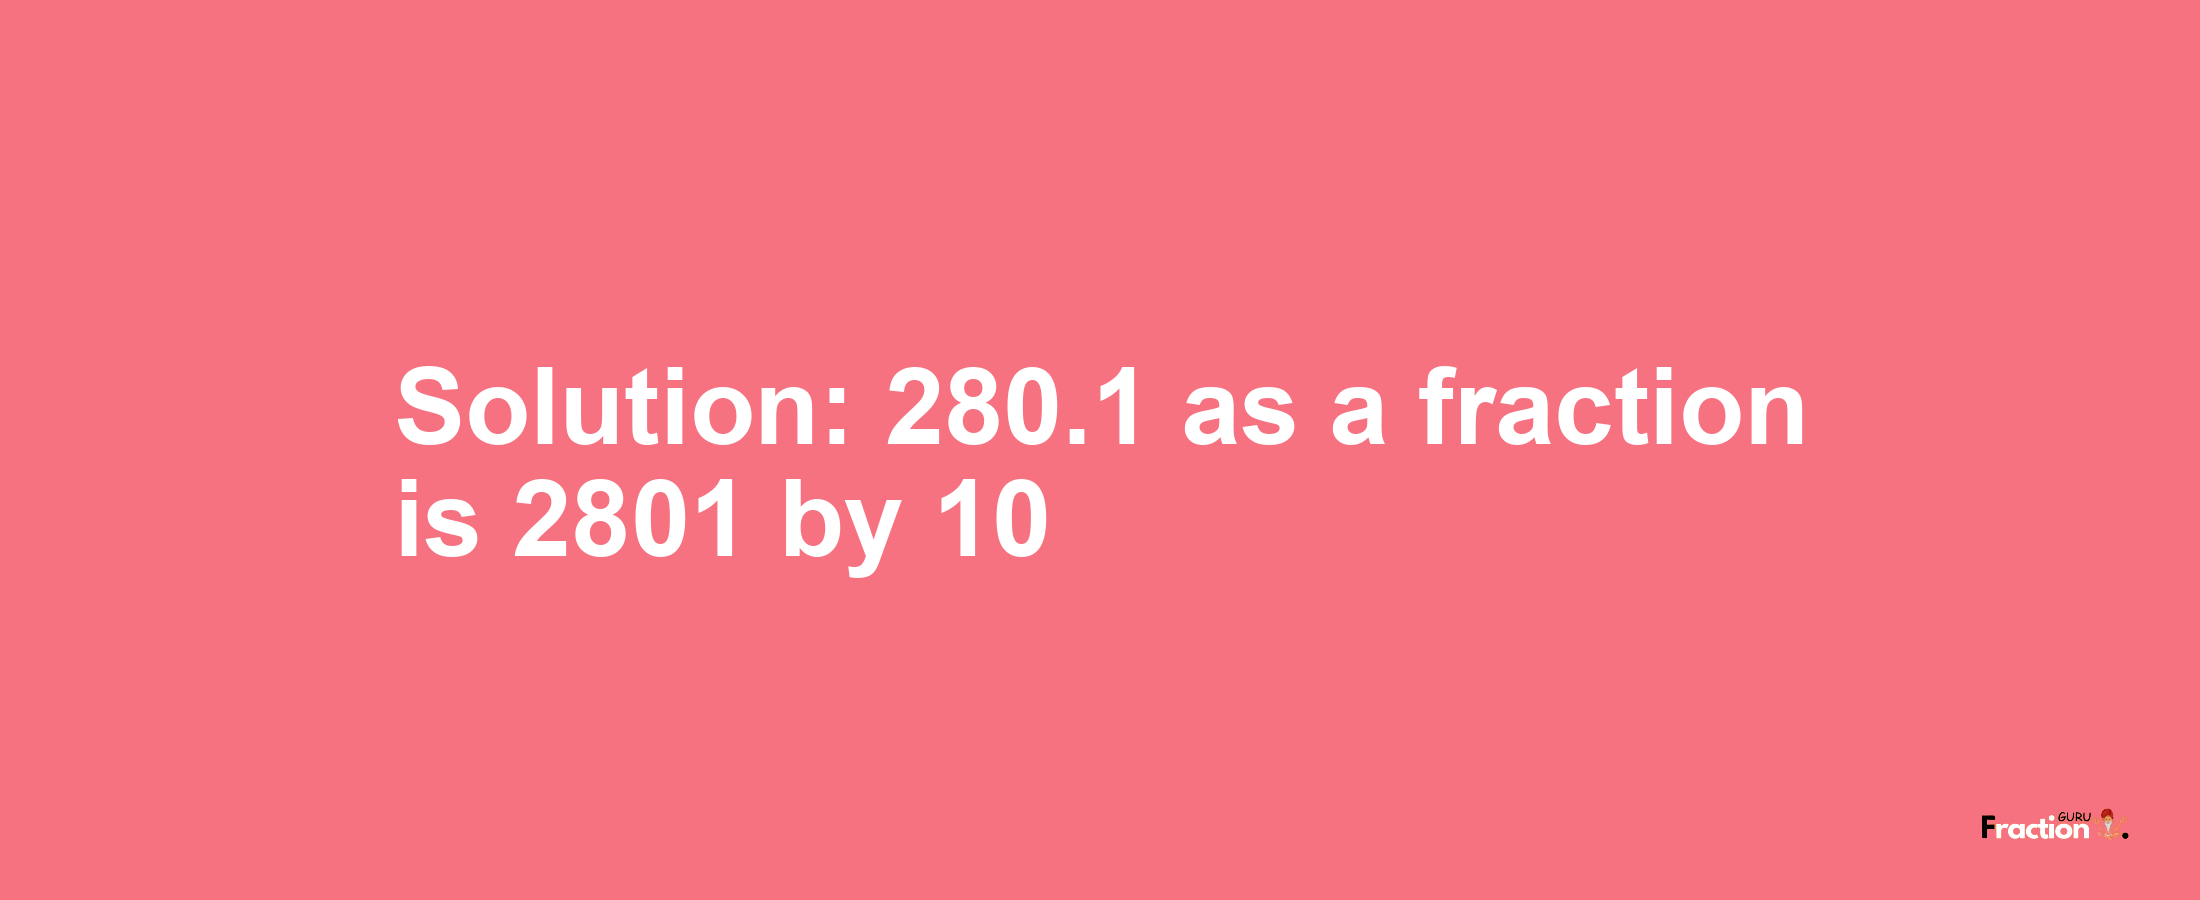 Solution:280.1 as a fraction is 2801/10